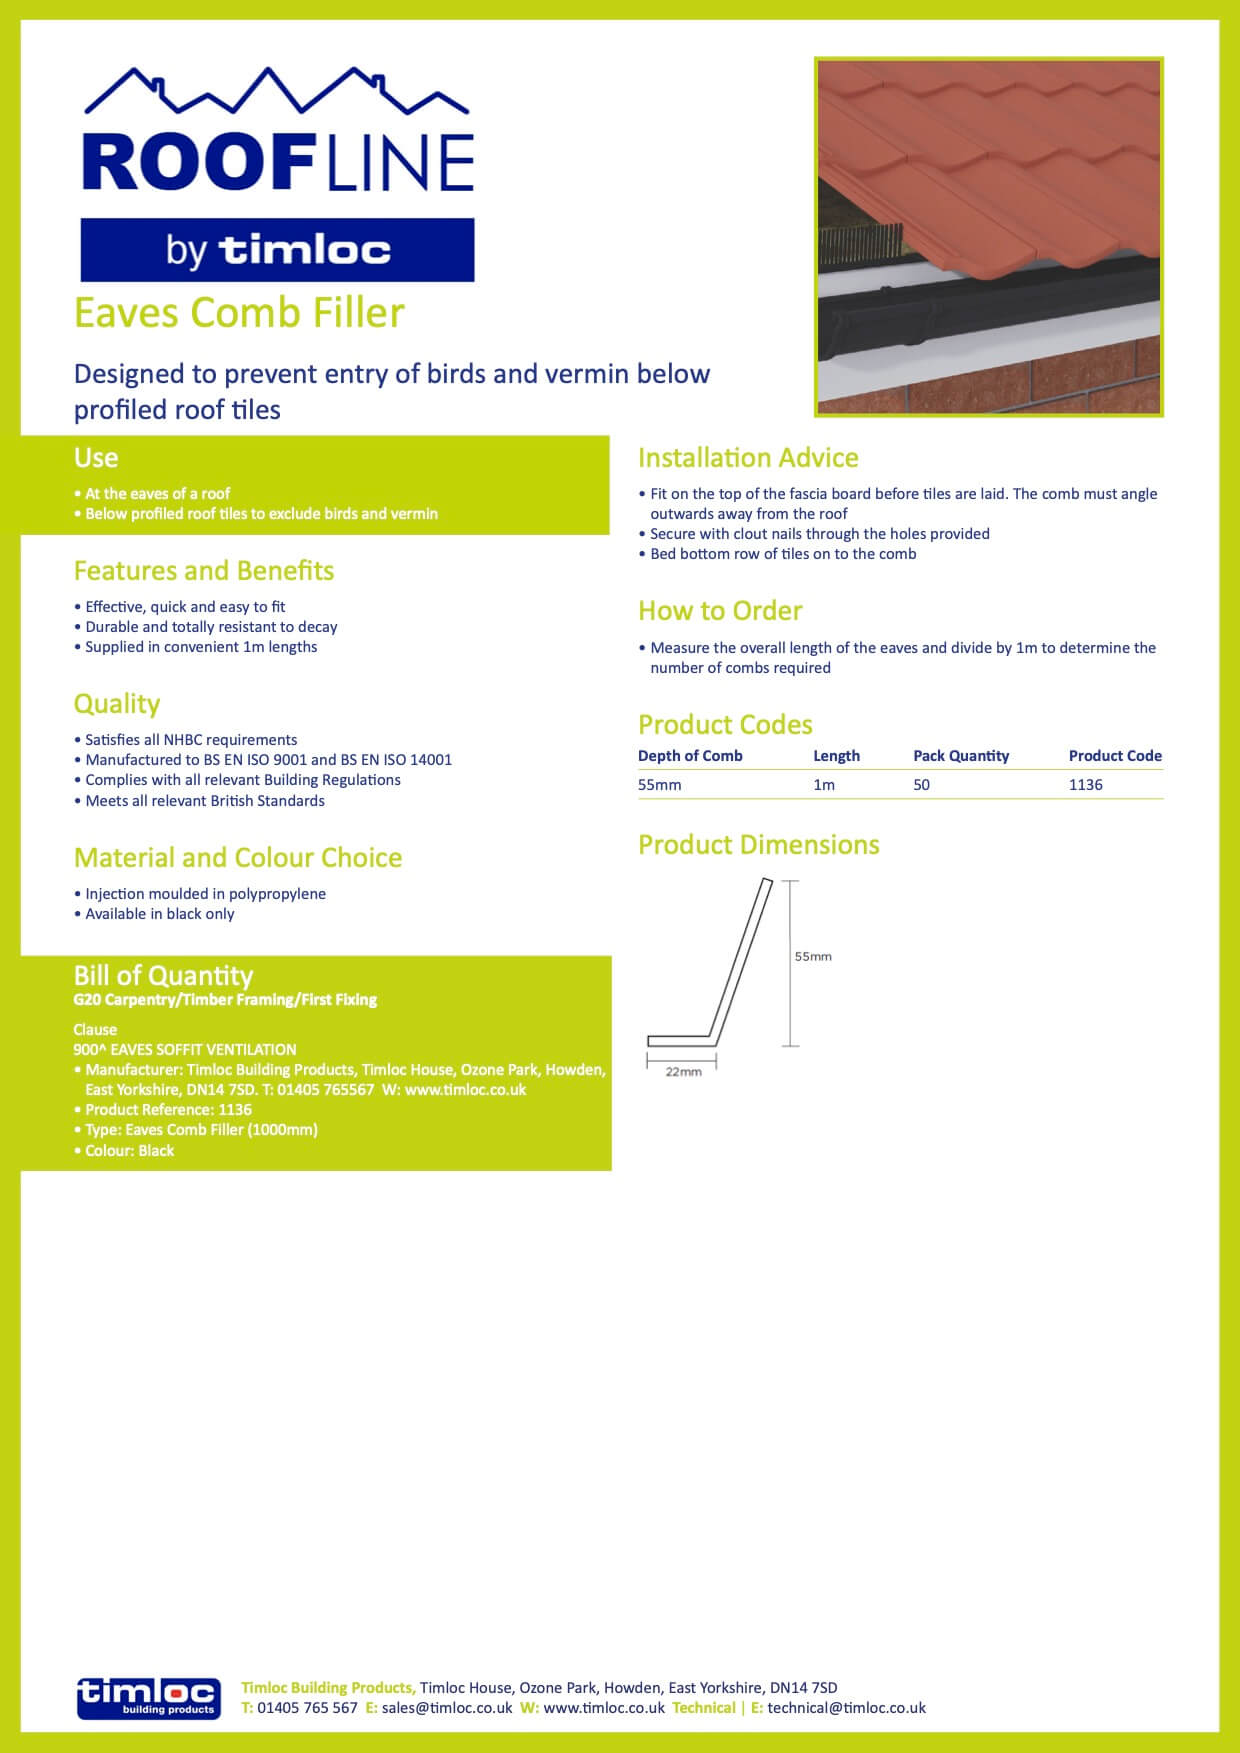 Timloc Building Products Datasheet - Eaves Comb Filler